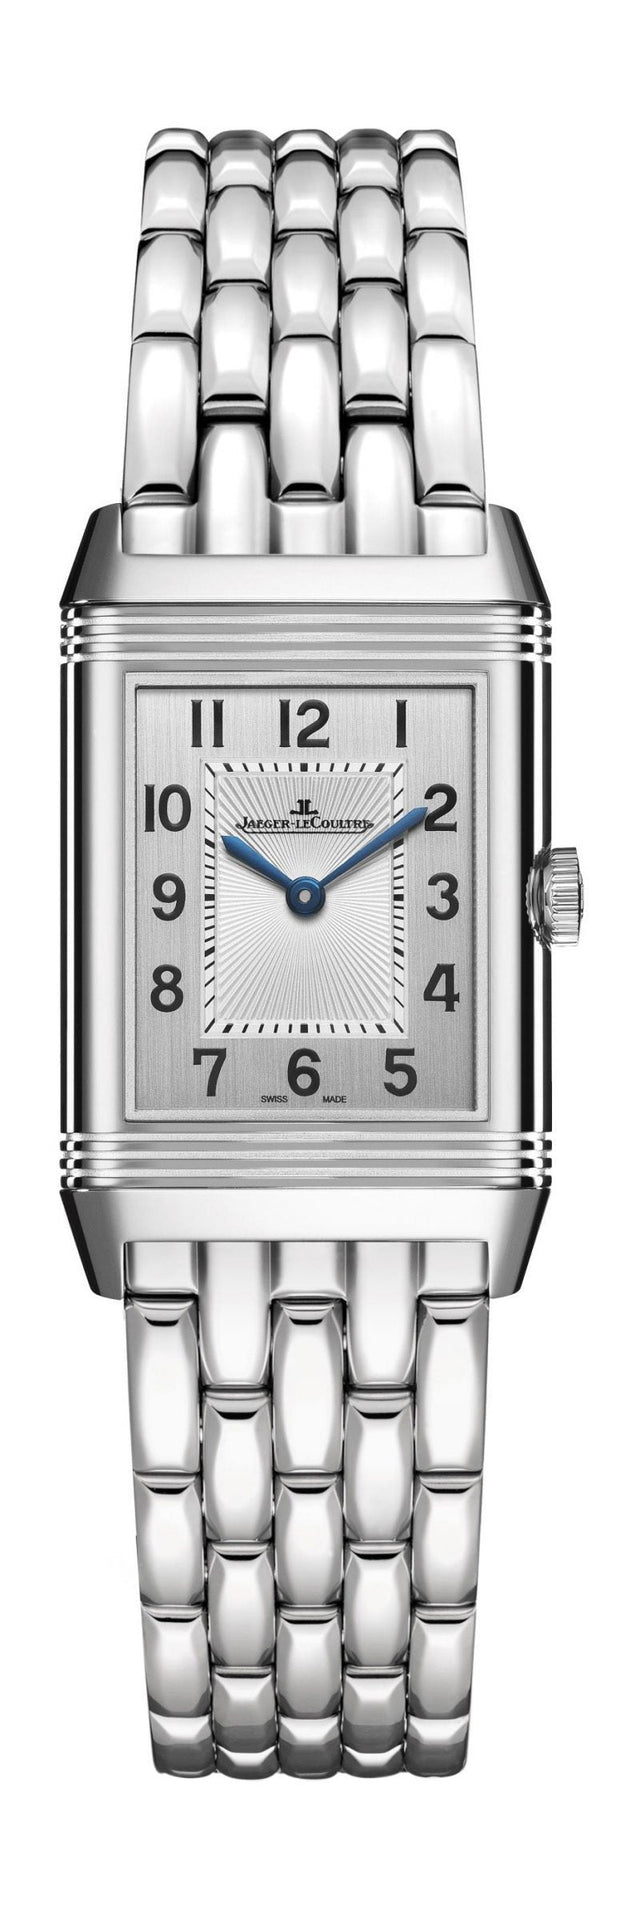 Jaeger-LeCoultre Reverso Classic Duetto Woman's watch Q2668130